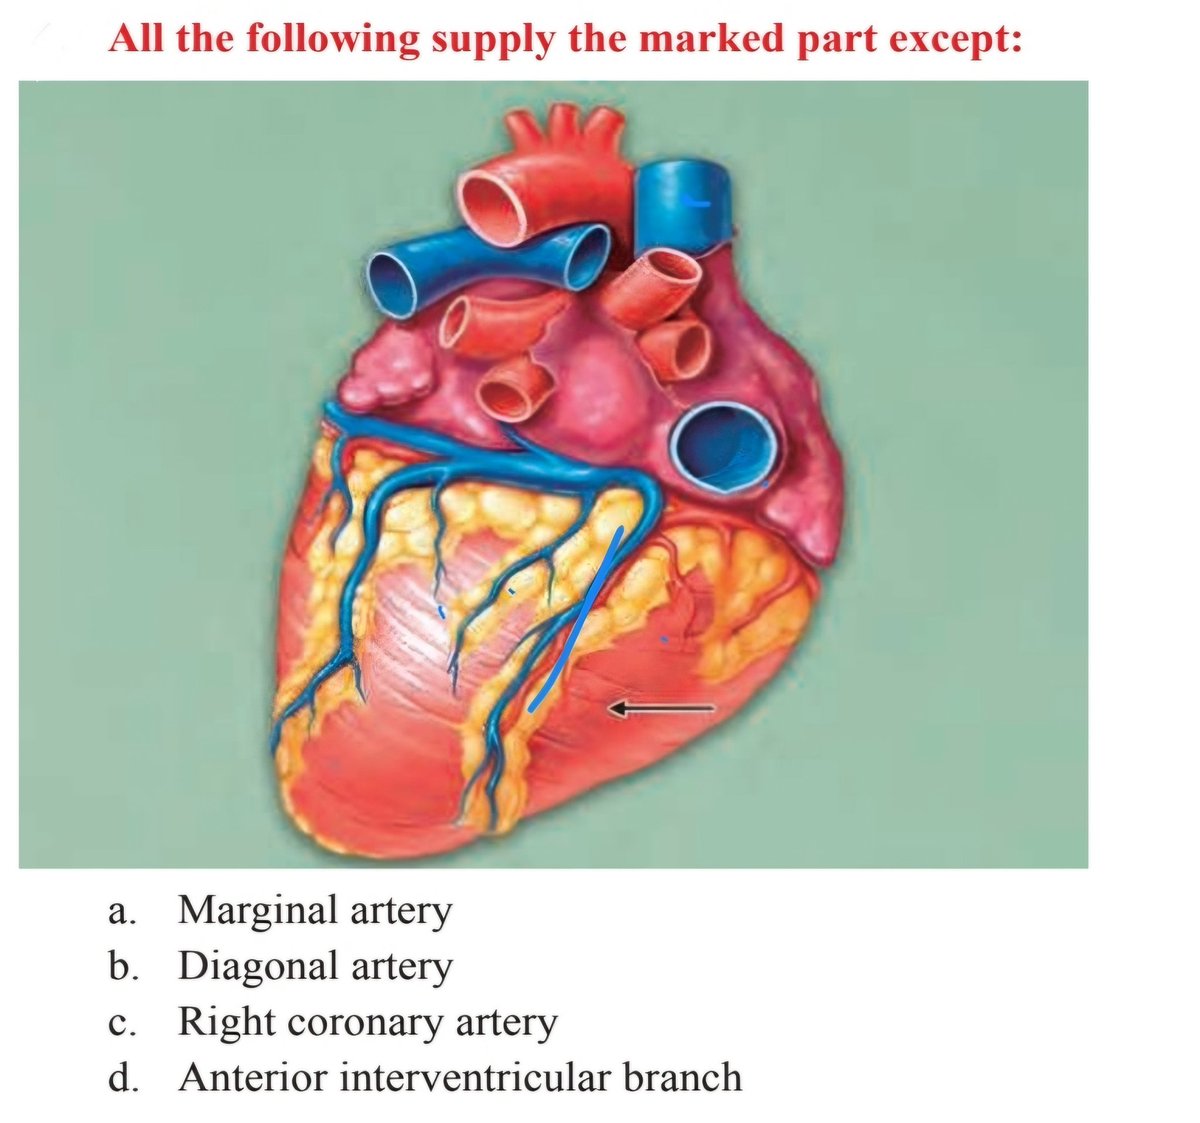 Comment your answer? 

#NEET #USMLE #INICET .#MEDX :